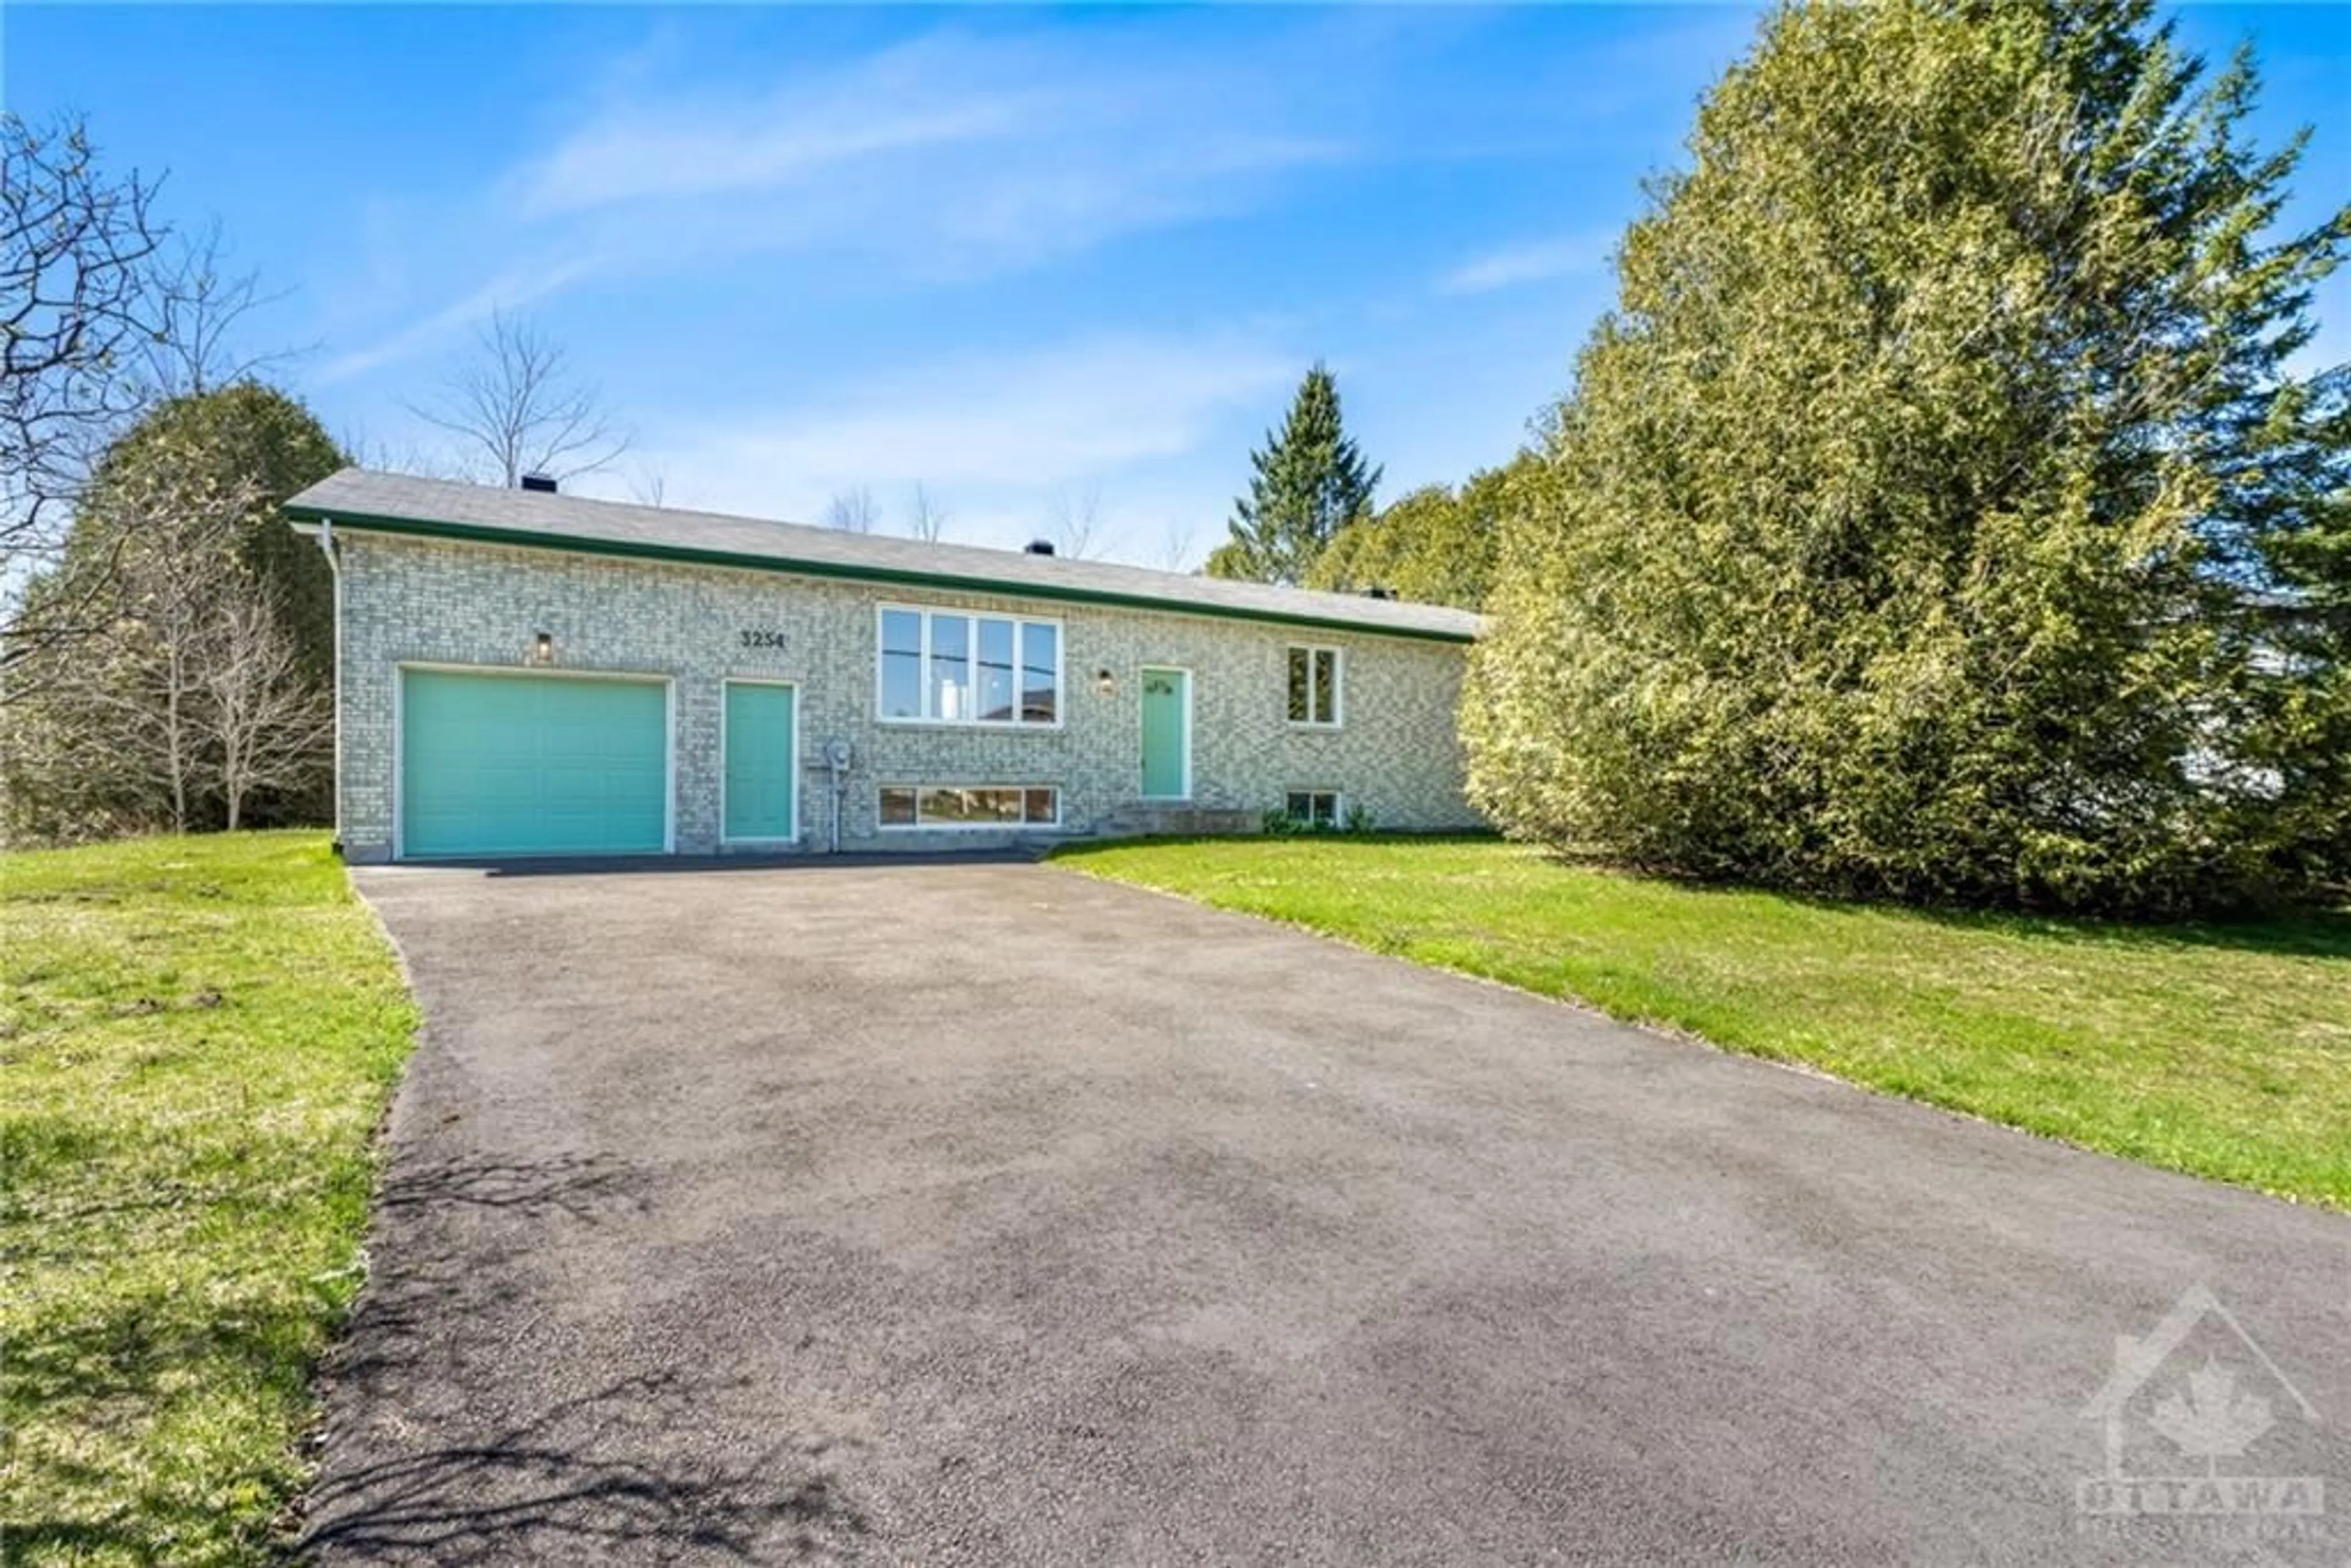 Cottage for 3254 GENDRON Rd, Hammond Ontario K0A 2A0